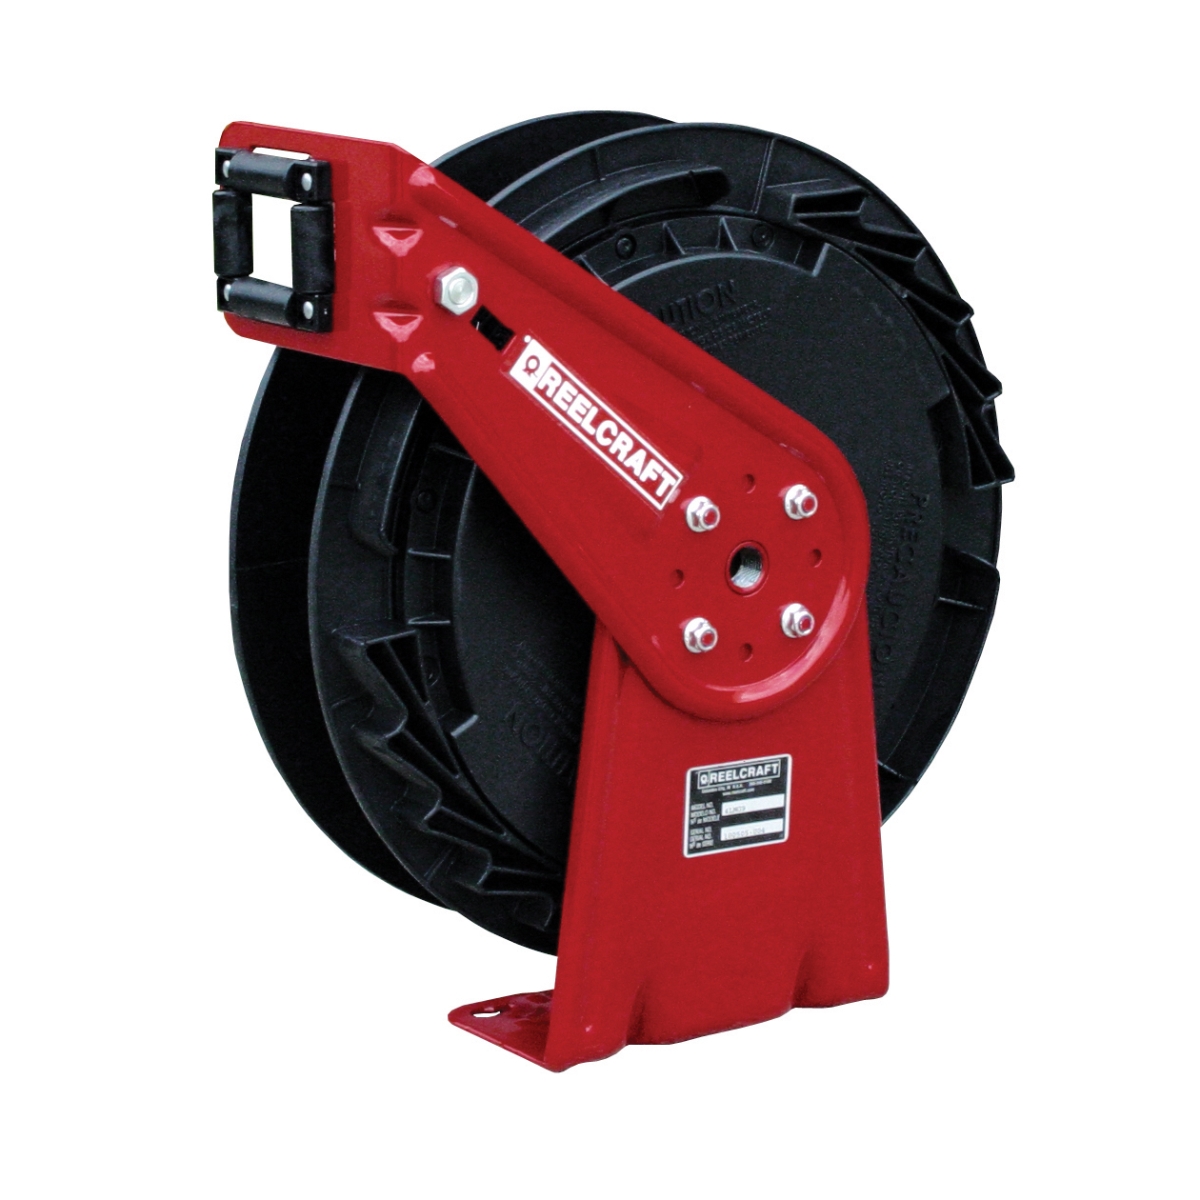 Rt803-olp 0.5 In. X 35 Ft. Medium Duty 300 Psi Air & Water Without Hose Reel, Red & Black